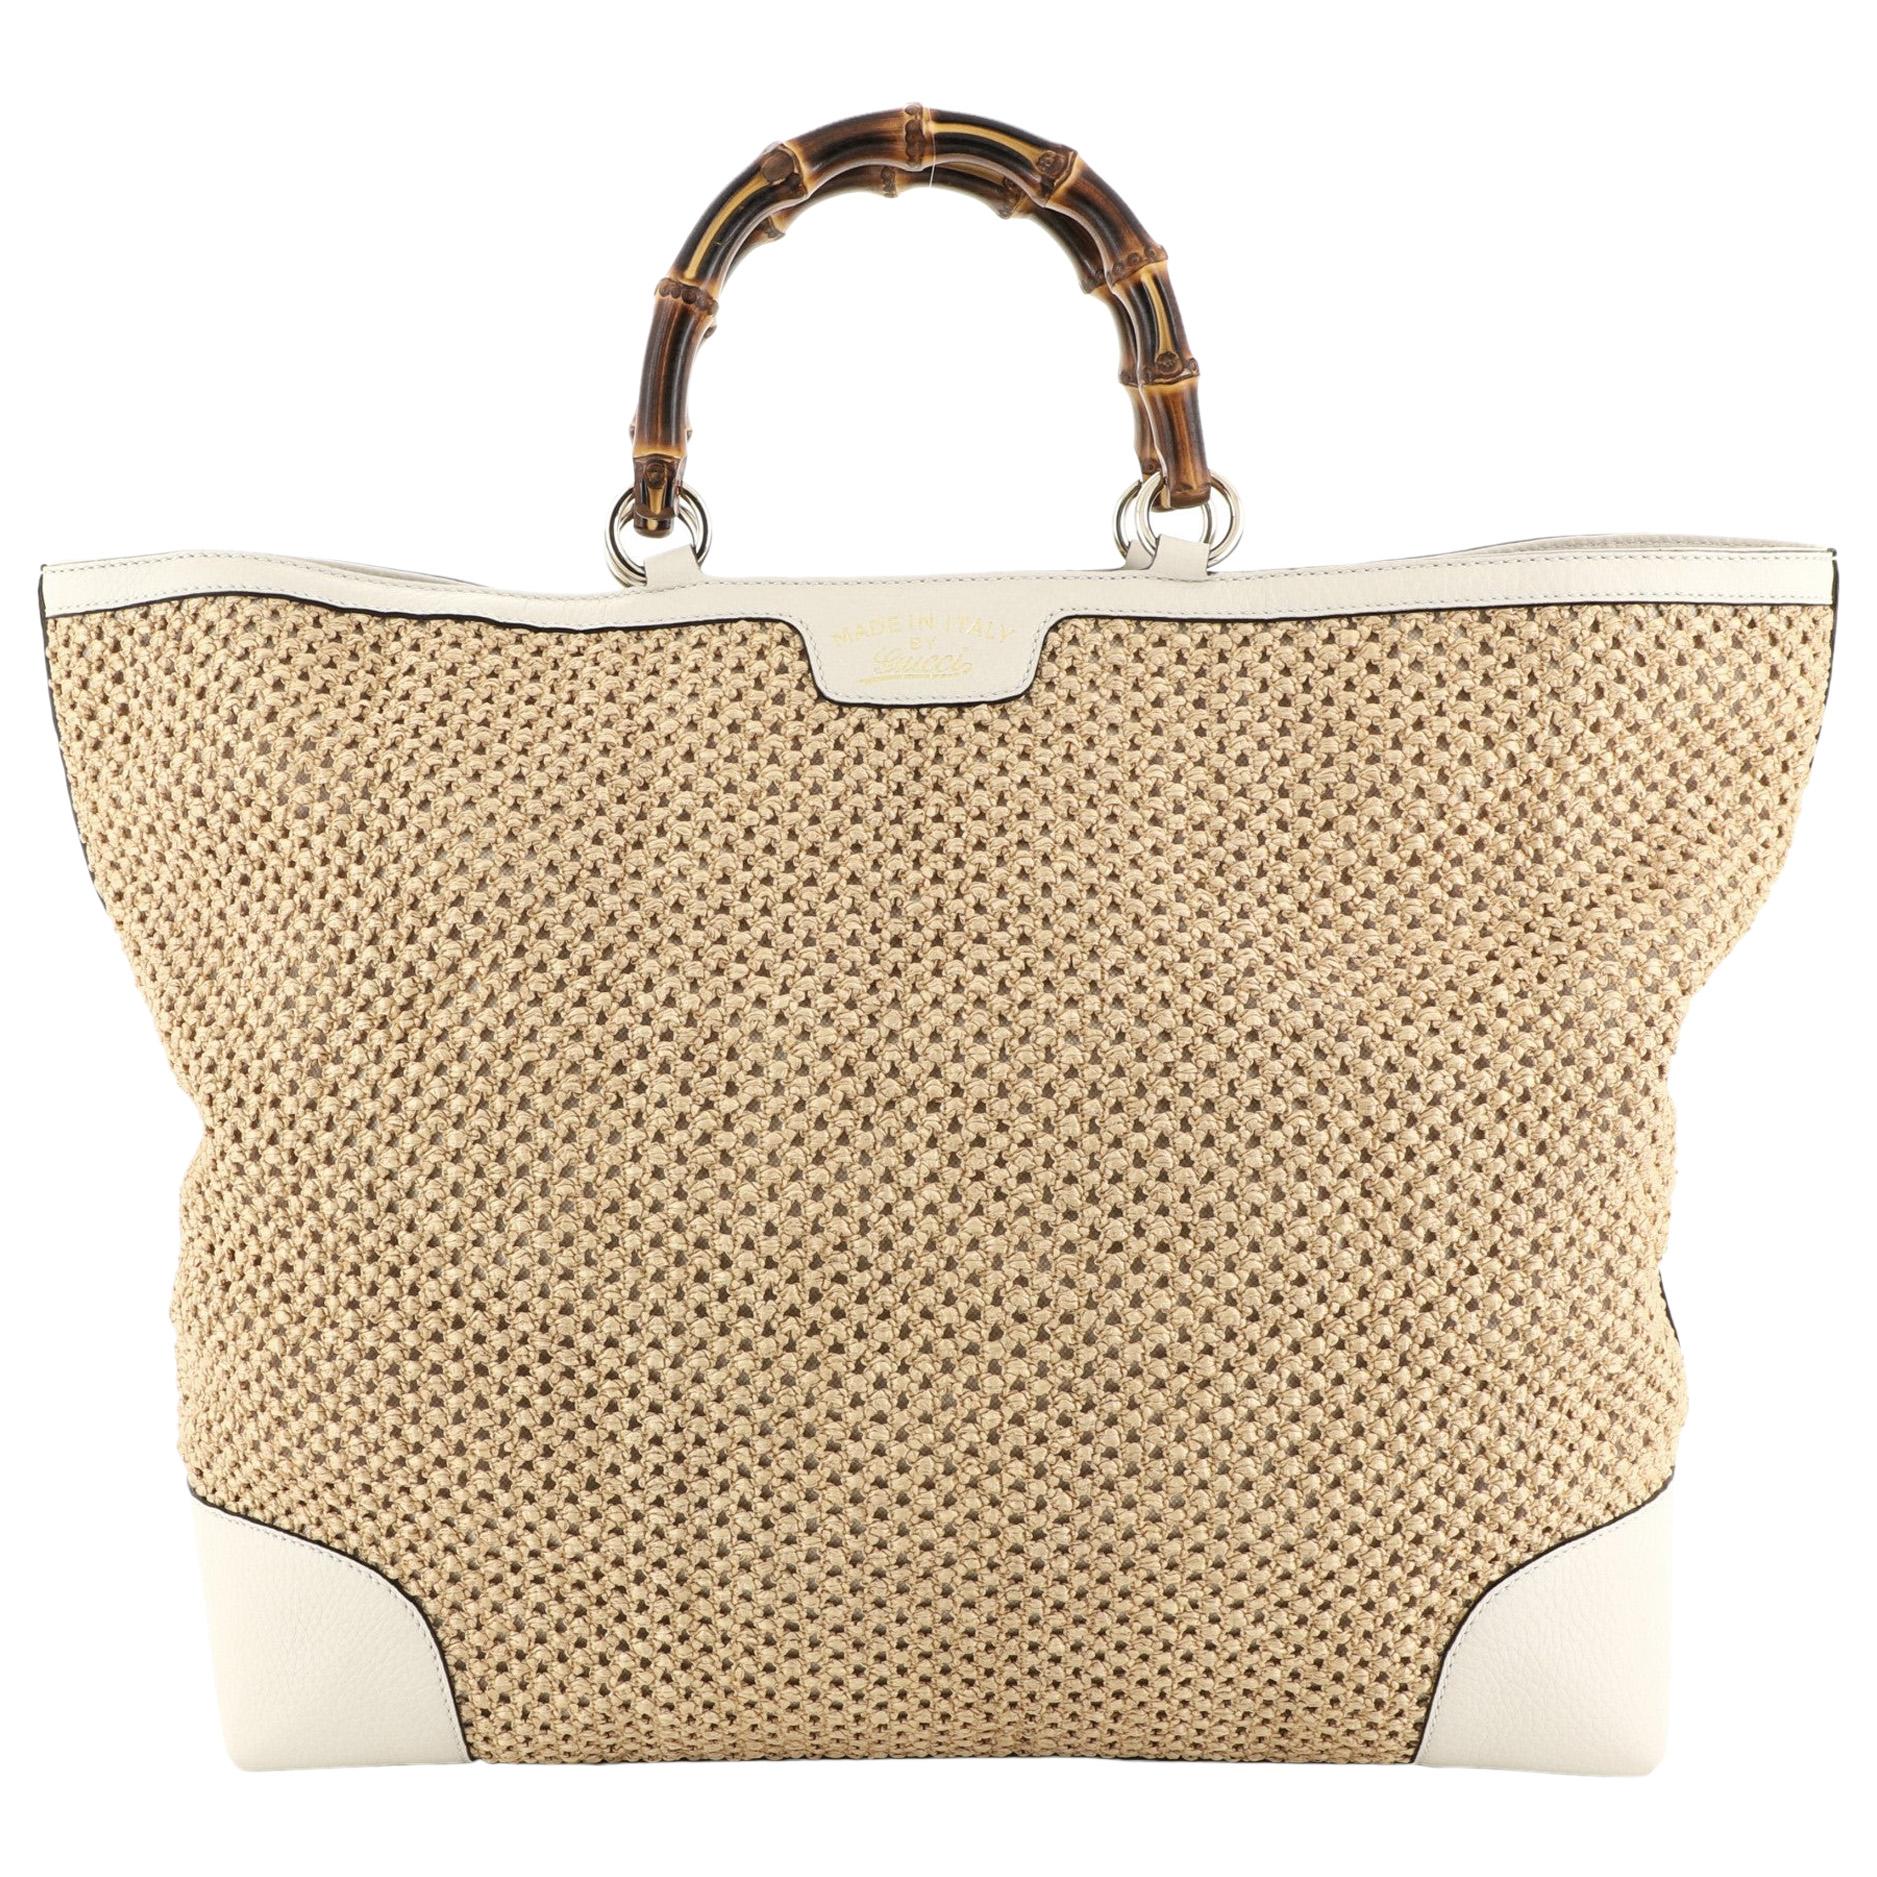 Gucci Bamboo Shopper Tote Woven Straw Large